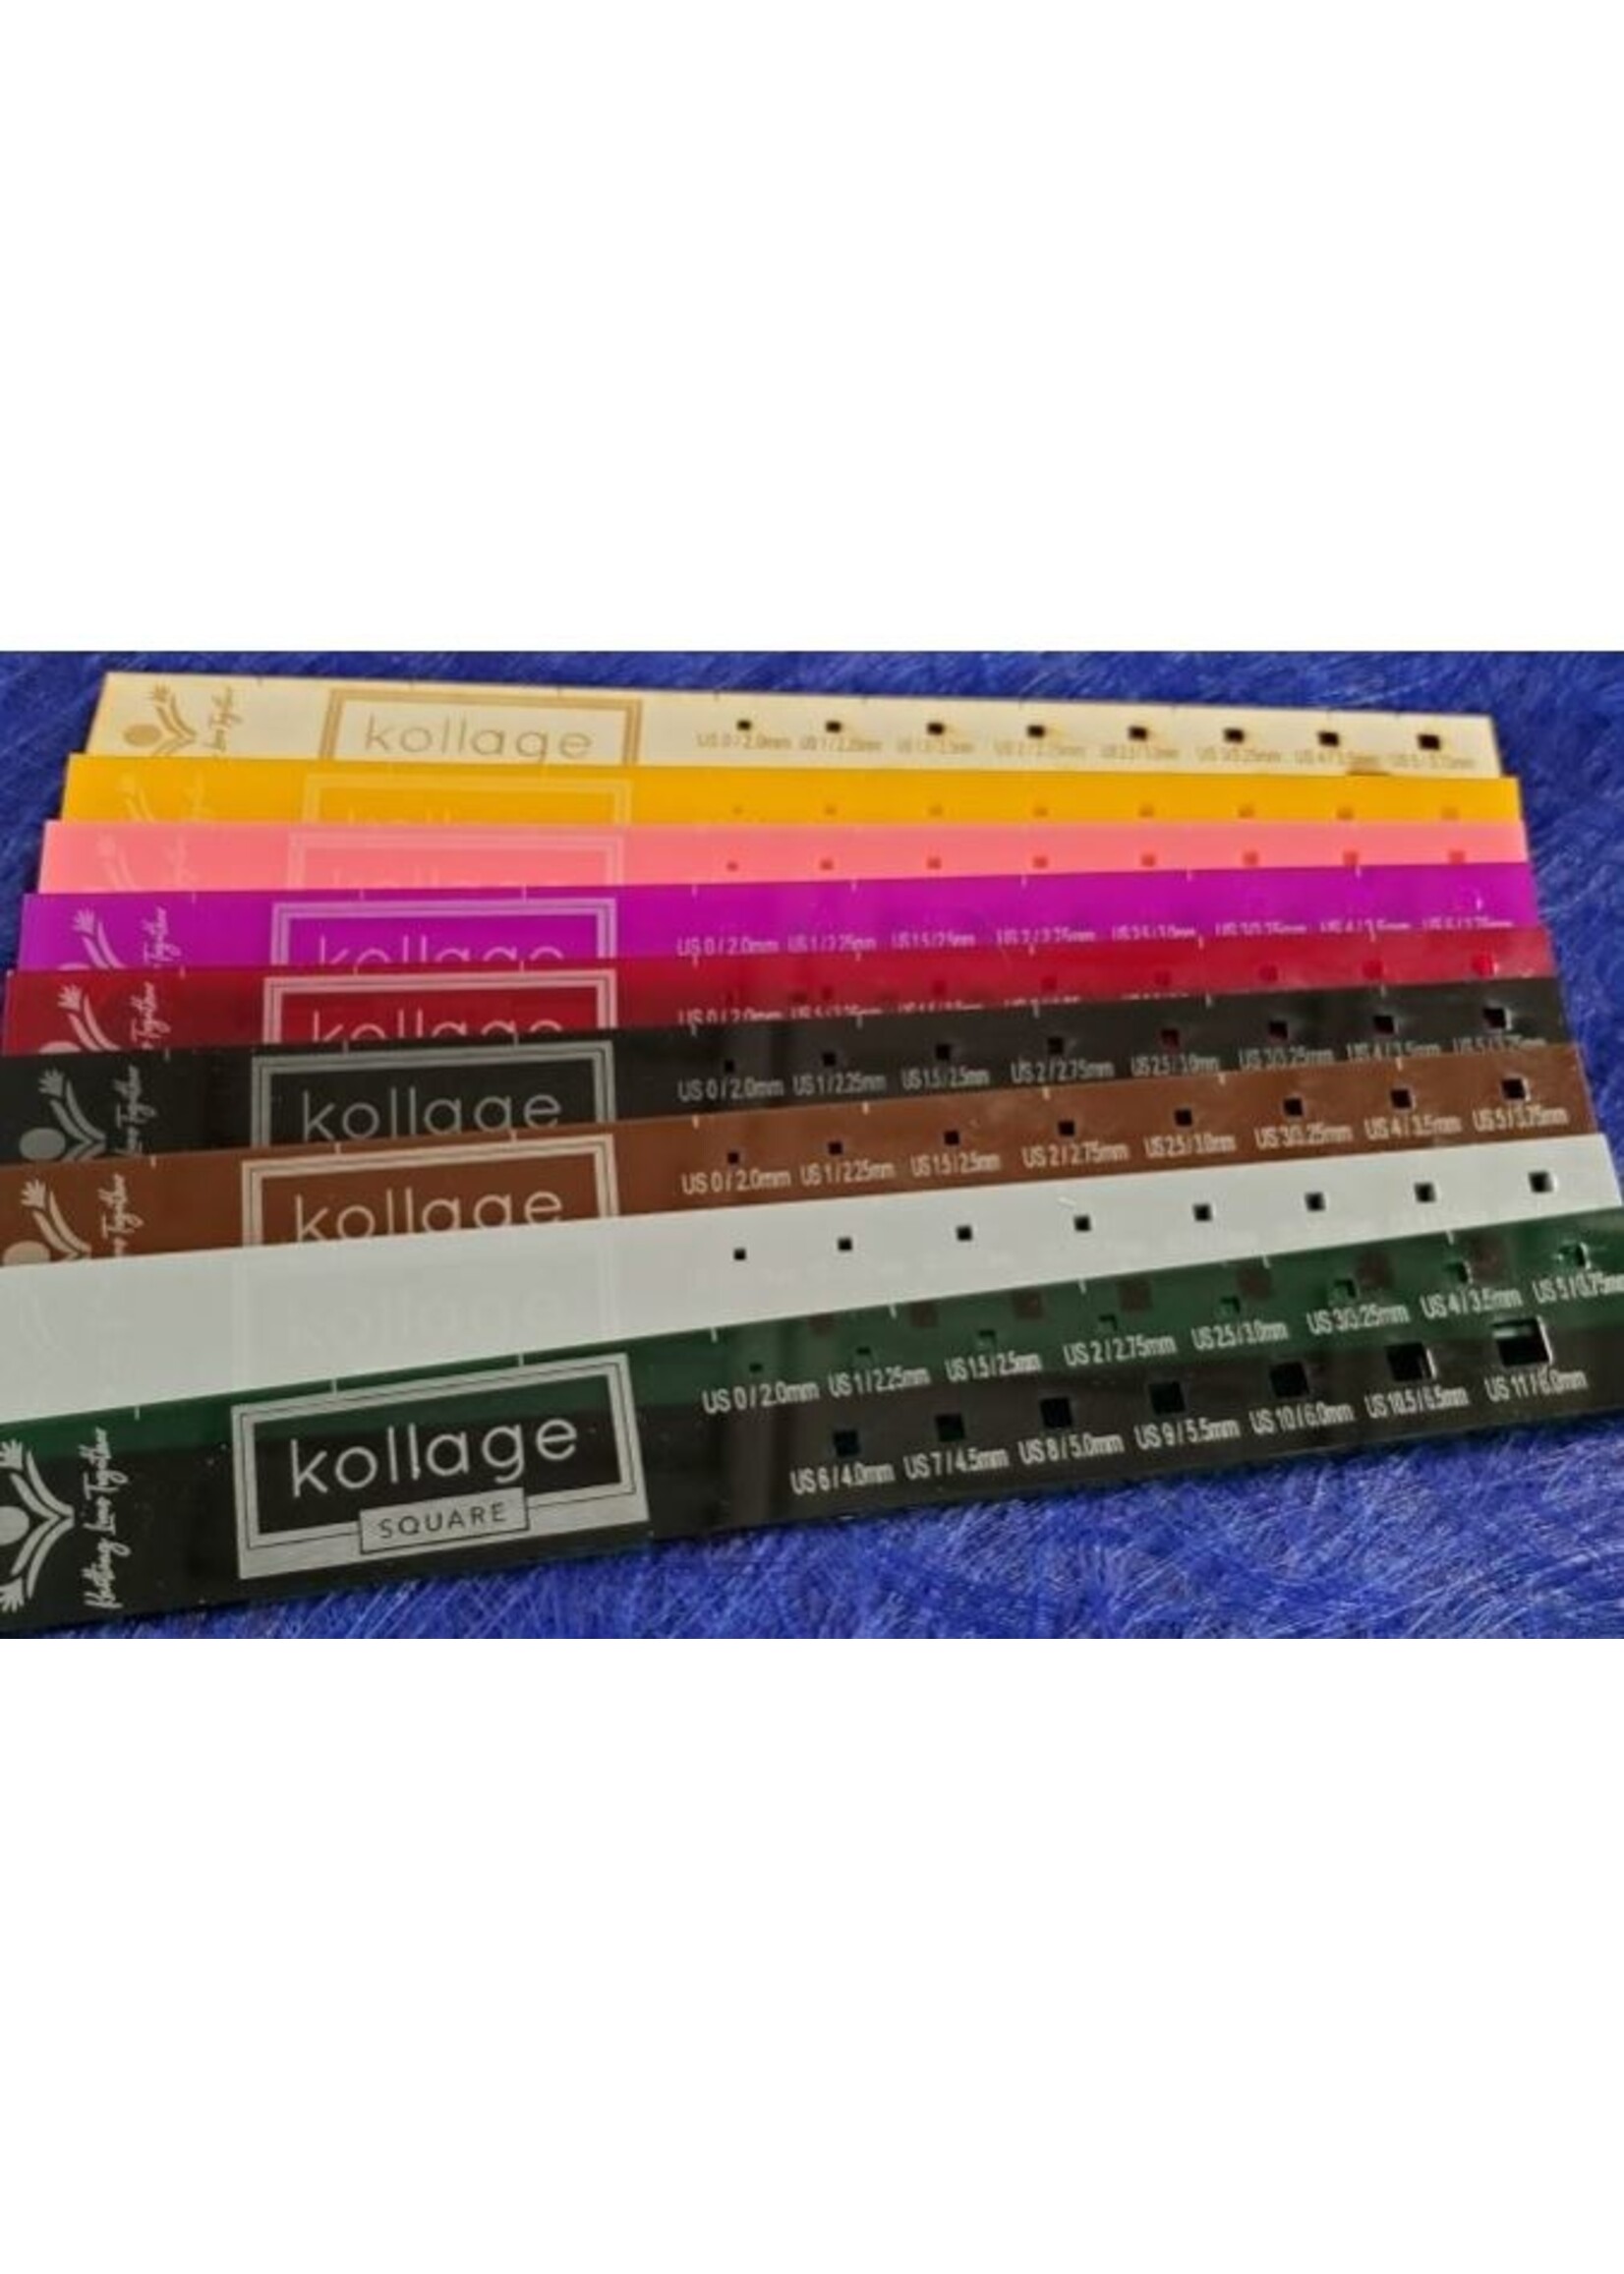 Kollage Kollage Square Gauge Ruler - Assorted clrs